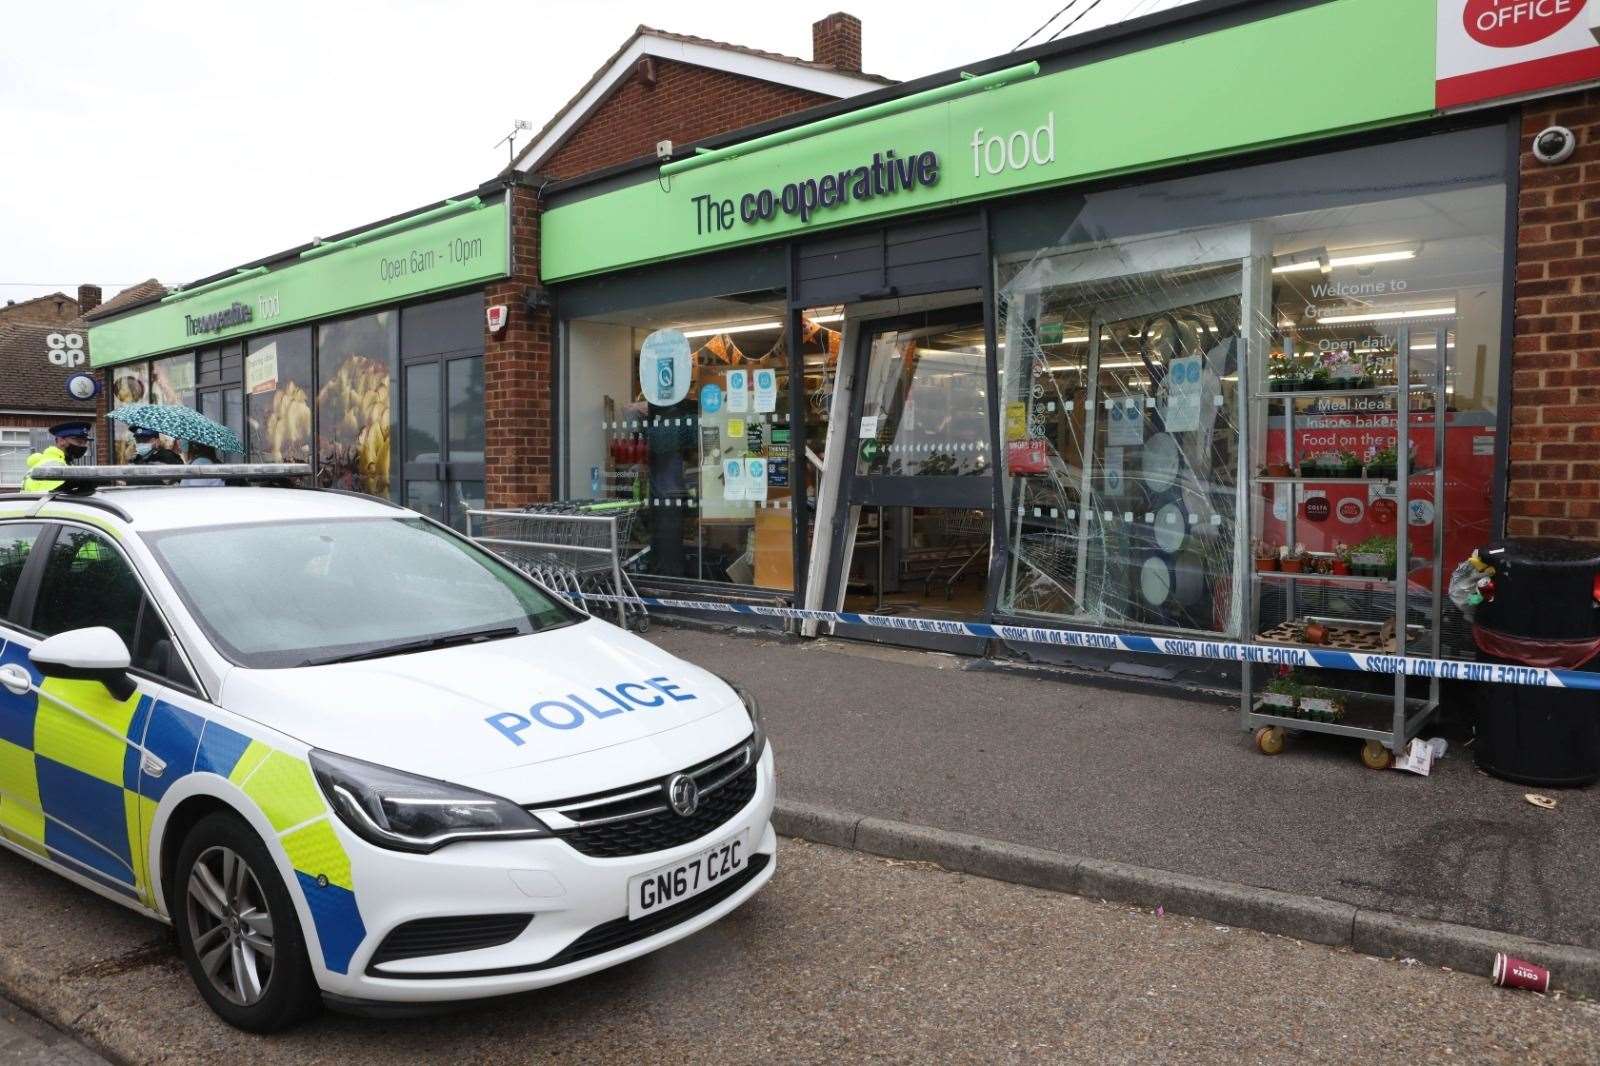 The Co-op on the Isle of Grain has been closed this morning while police carry out an investigation after the shop was ram-raided by thieves overnight. Picture: UKNIP